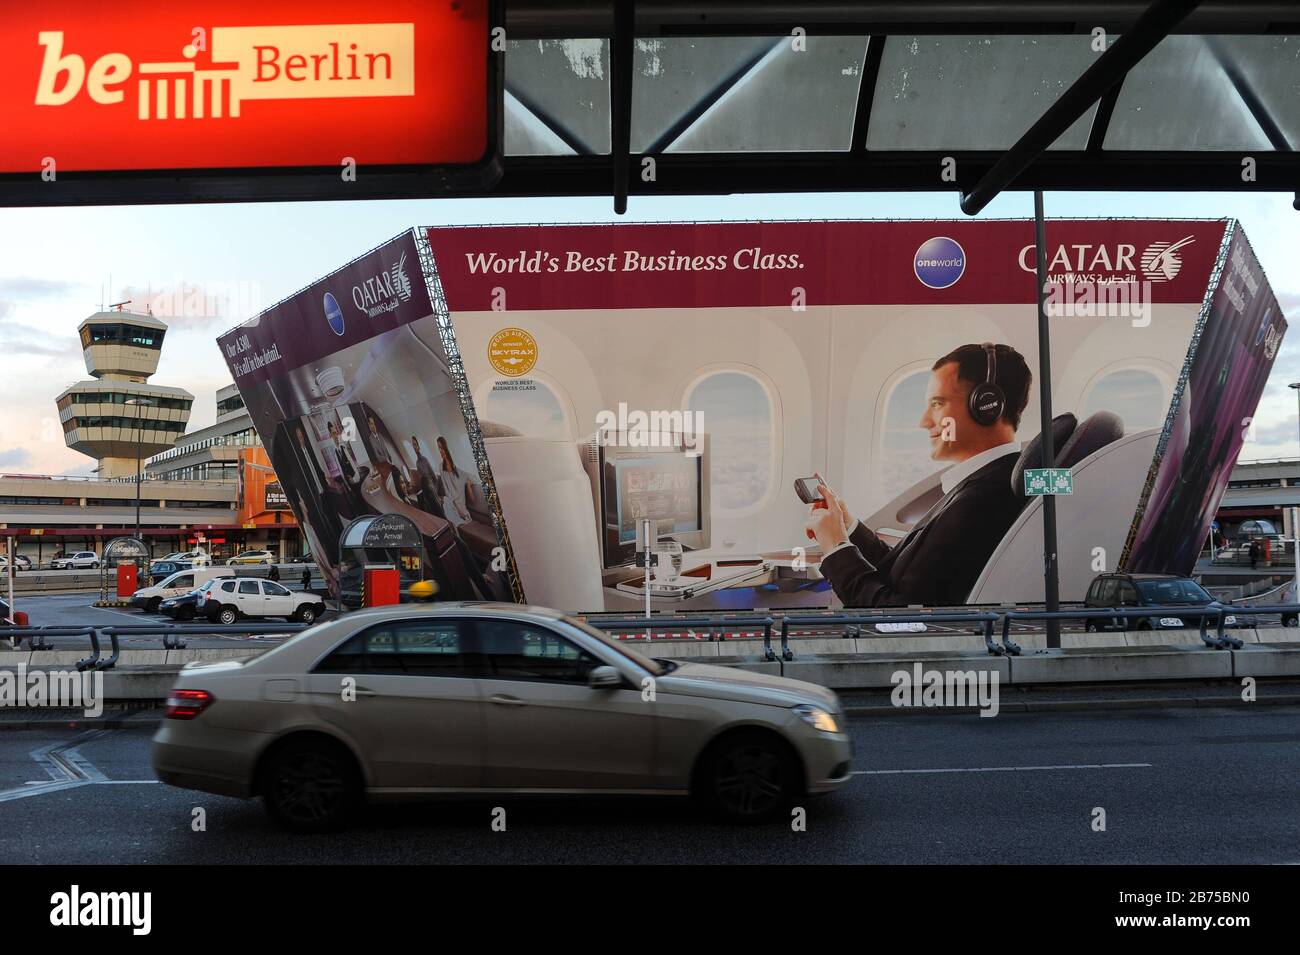 30.03.2015, Berlin, Germany, Europe - Advertisement for the Business Class of Qatar Airways at the Berlin Airport Tegel. [automated translation] Stock Photo